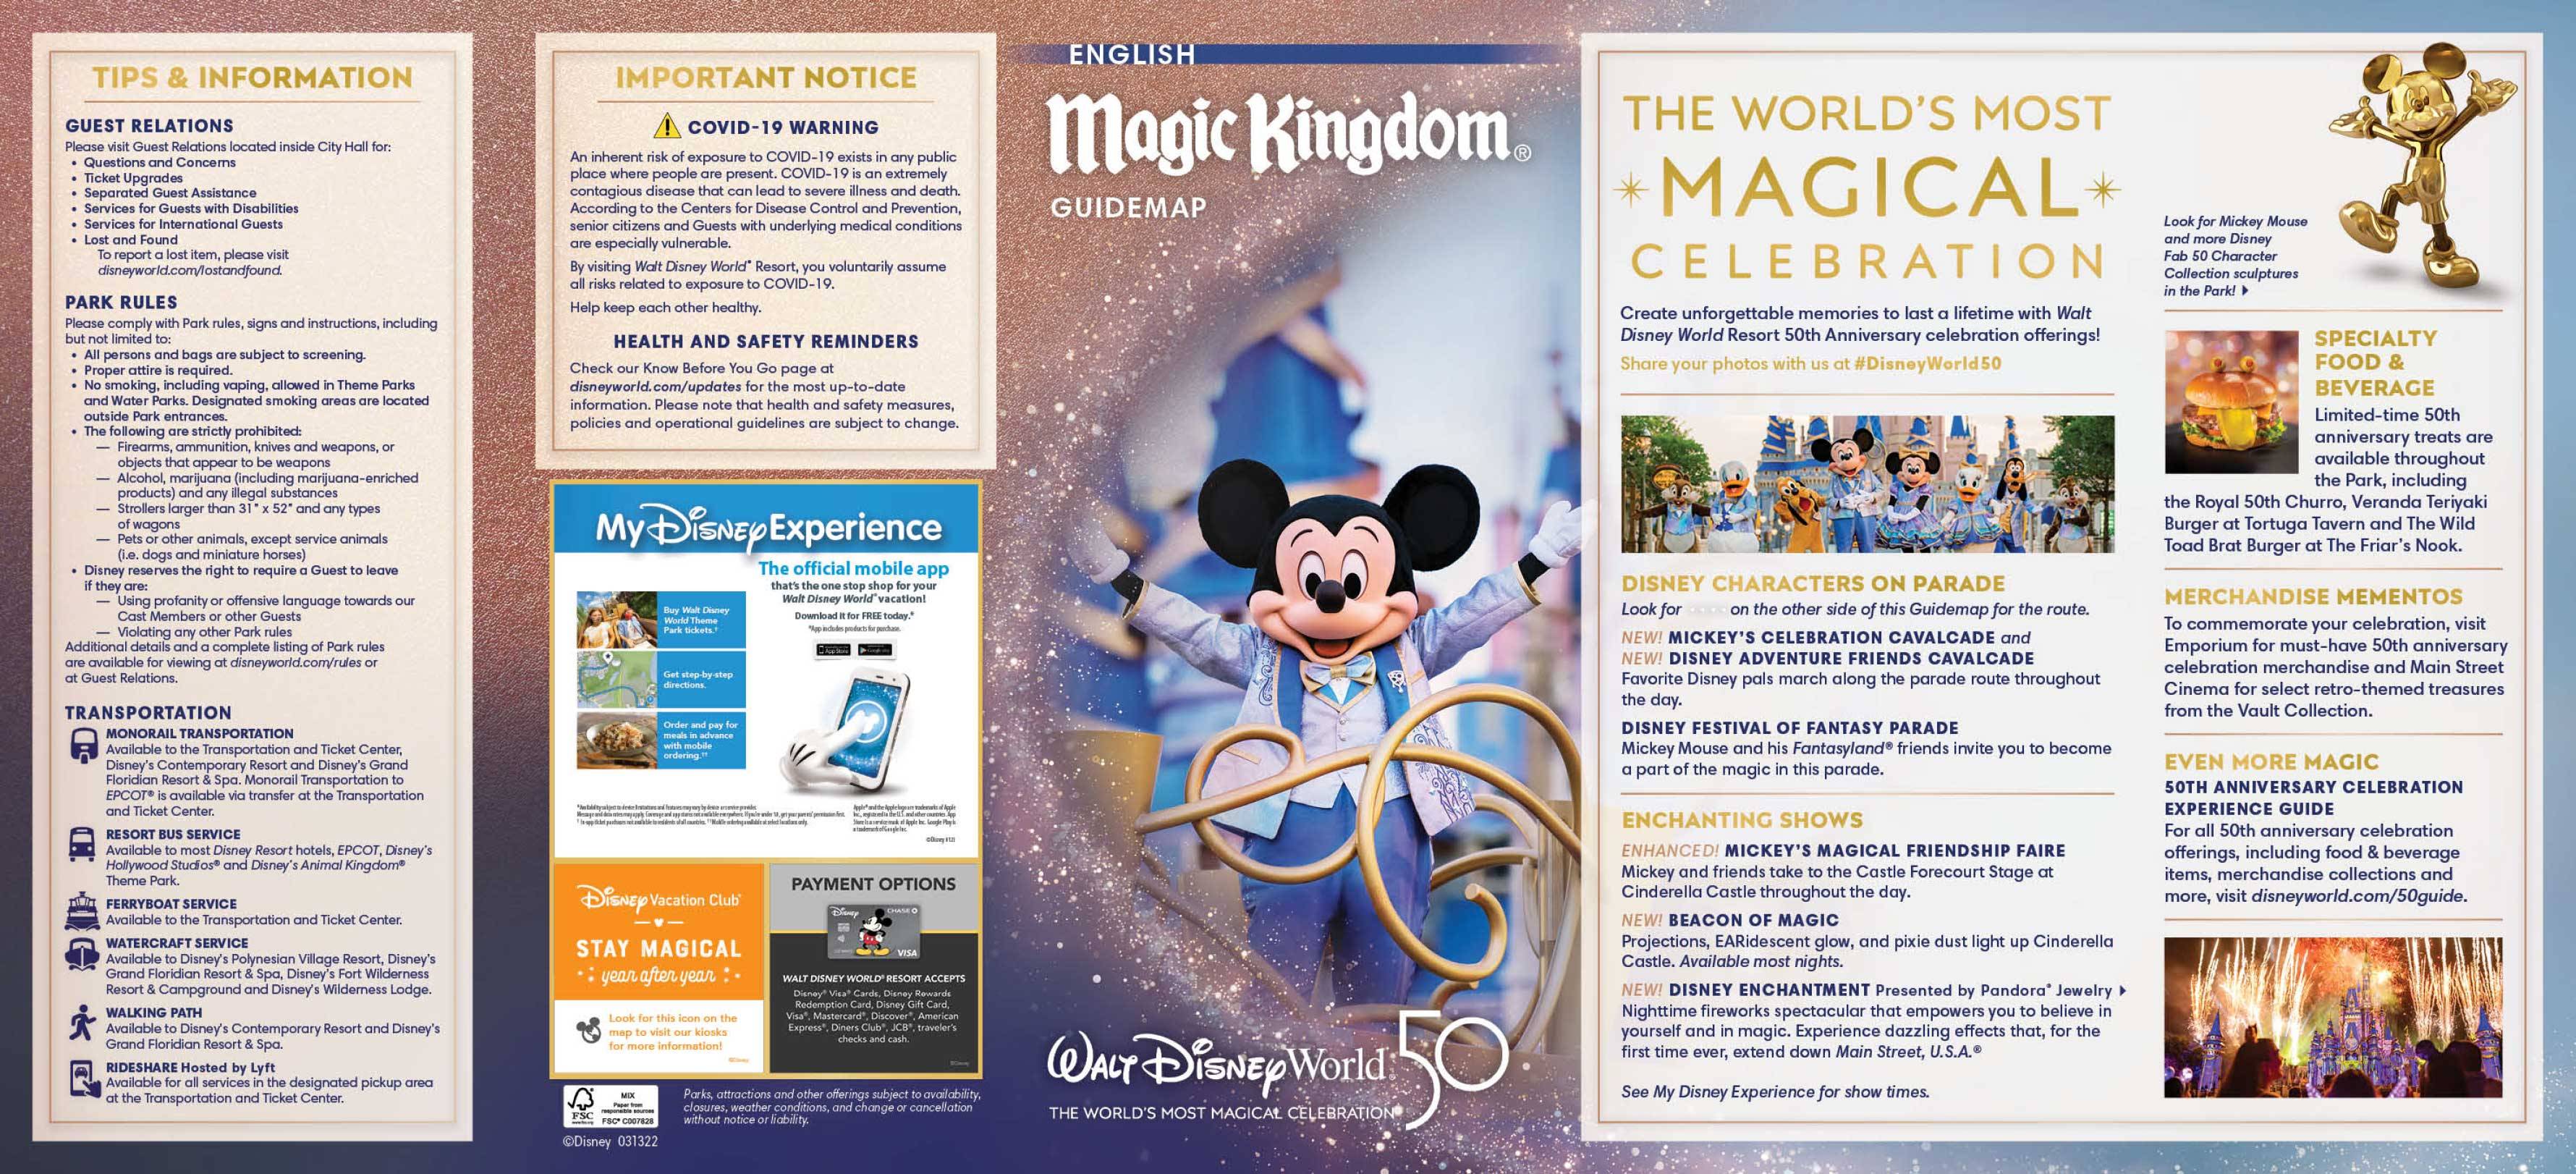 New Magic Kingdom guide map includes updated show and parade details